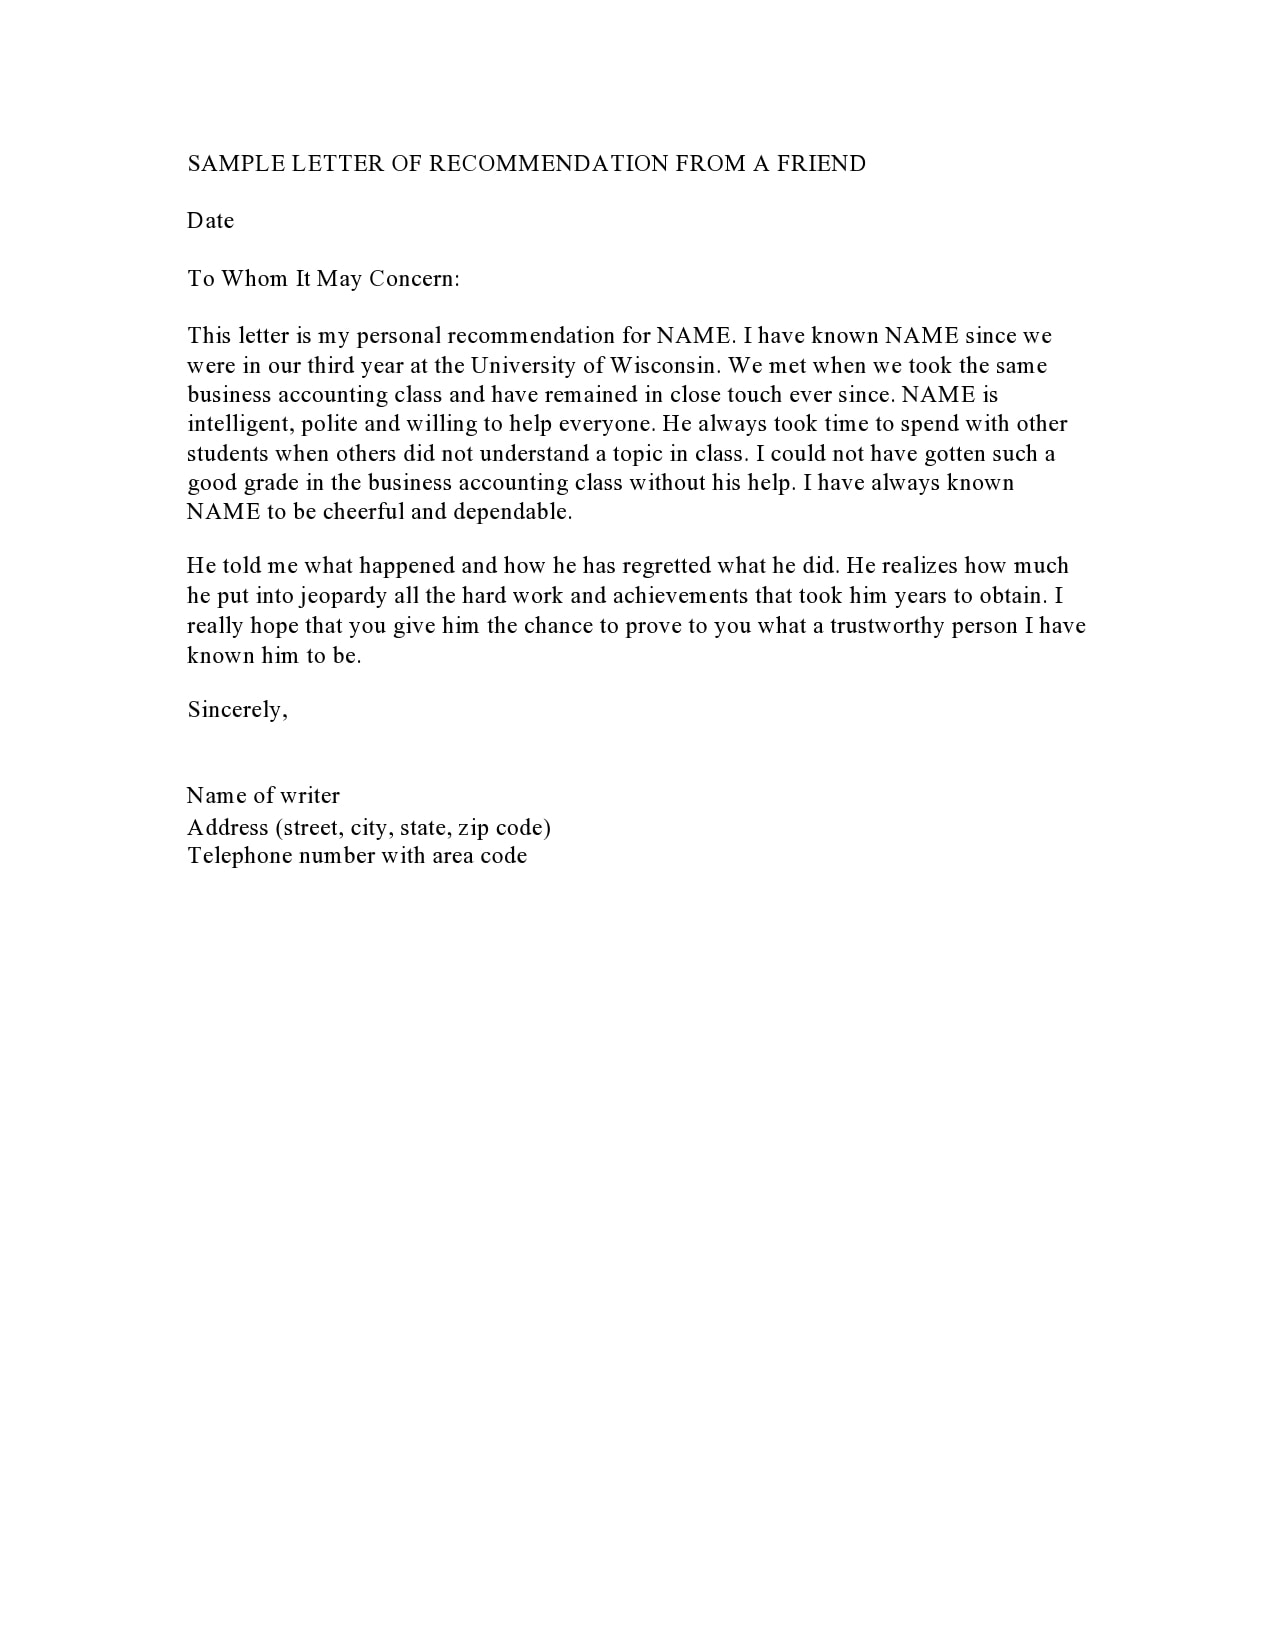 Template Recommendation Letter For A Friend